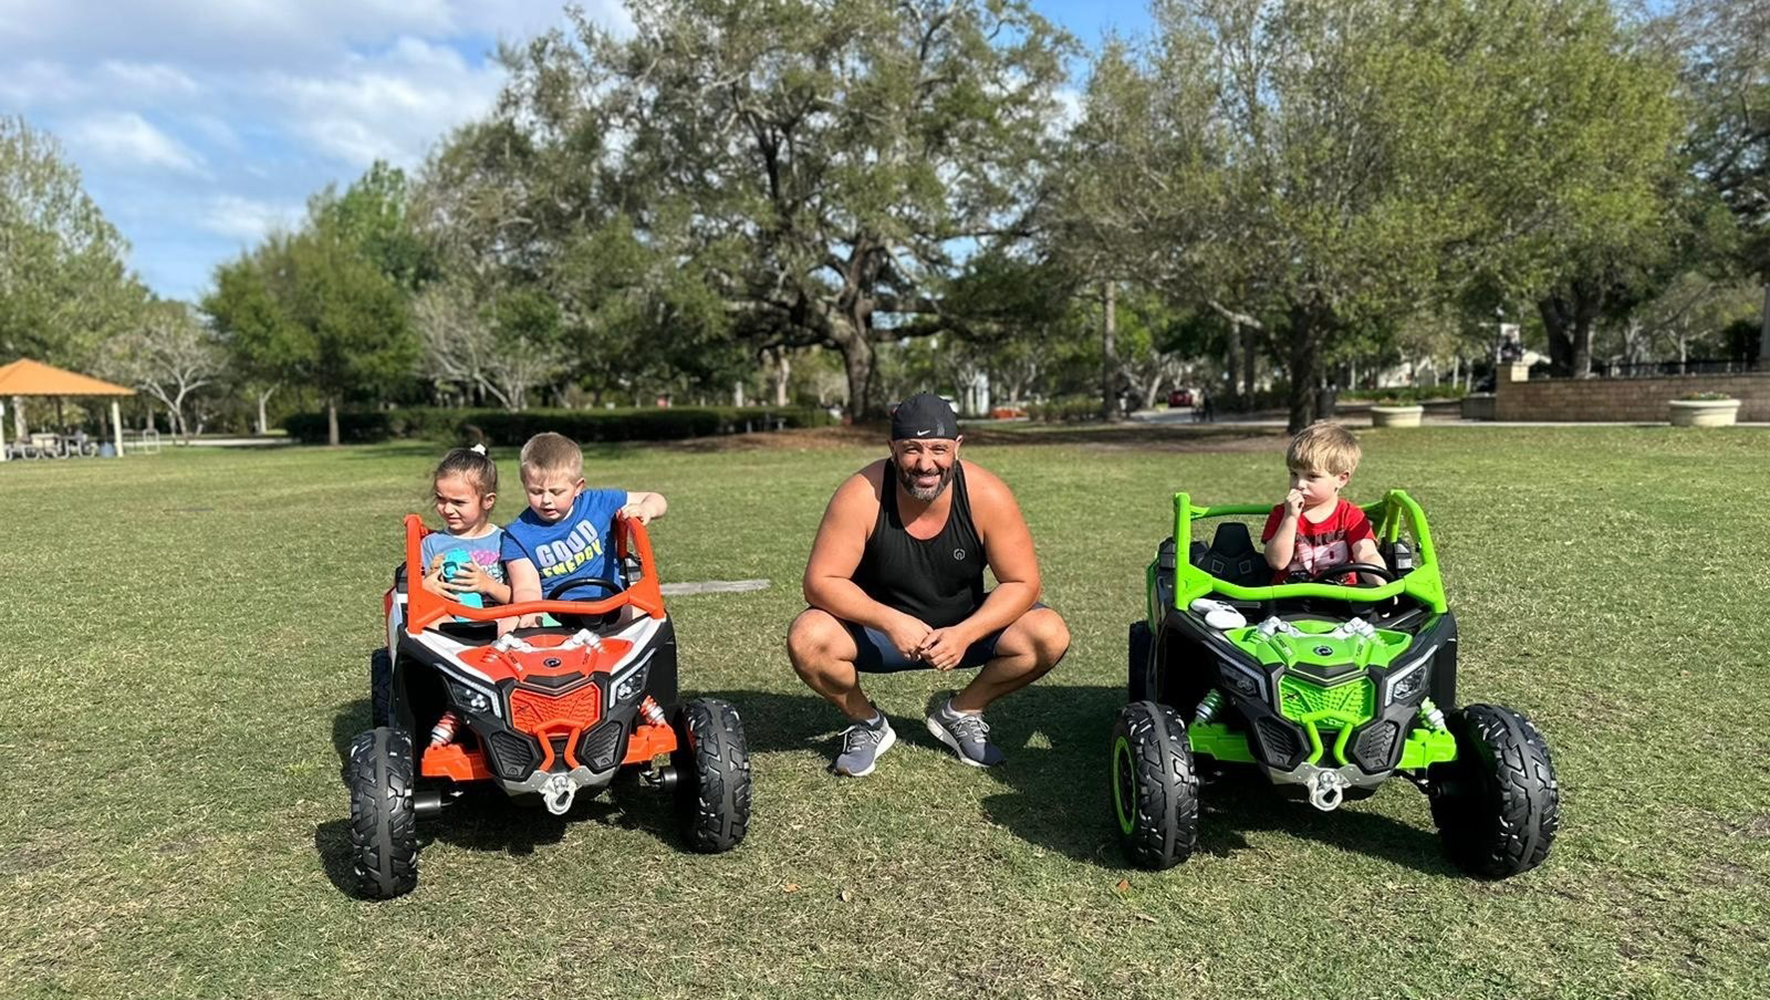 Zied Ben Taleb poses with children riding in the remote control cars available at his business, Fun Florida ZBT, LLC. Ben Taleb was able to start this business with support from EAF and our partner, Gulf Coast JFCS. (Courtesy of Gulf Coast JFCS)